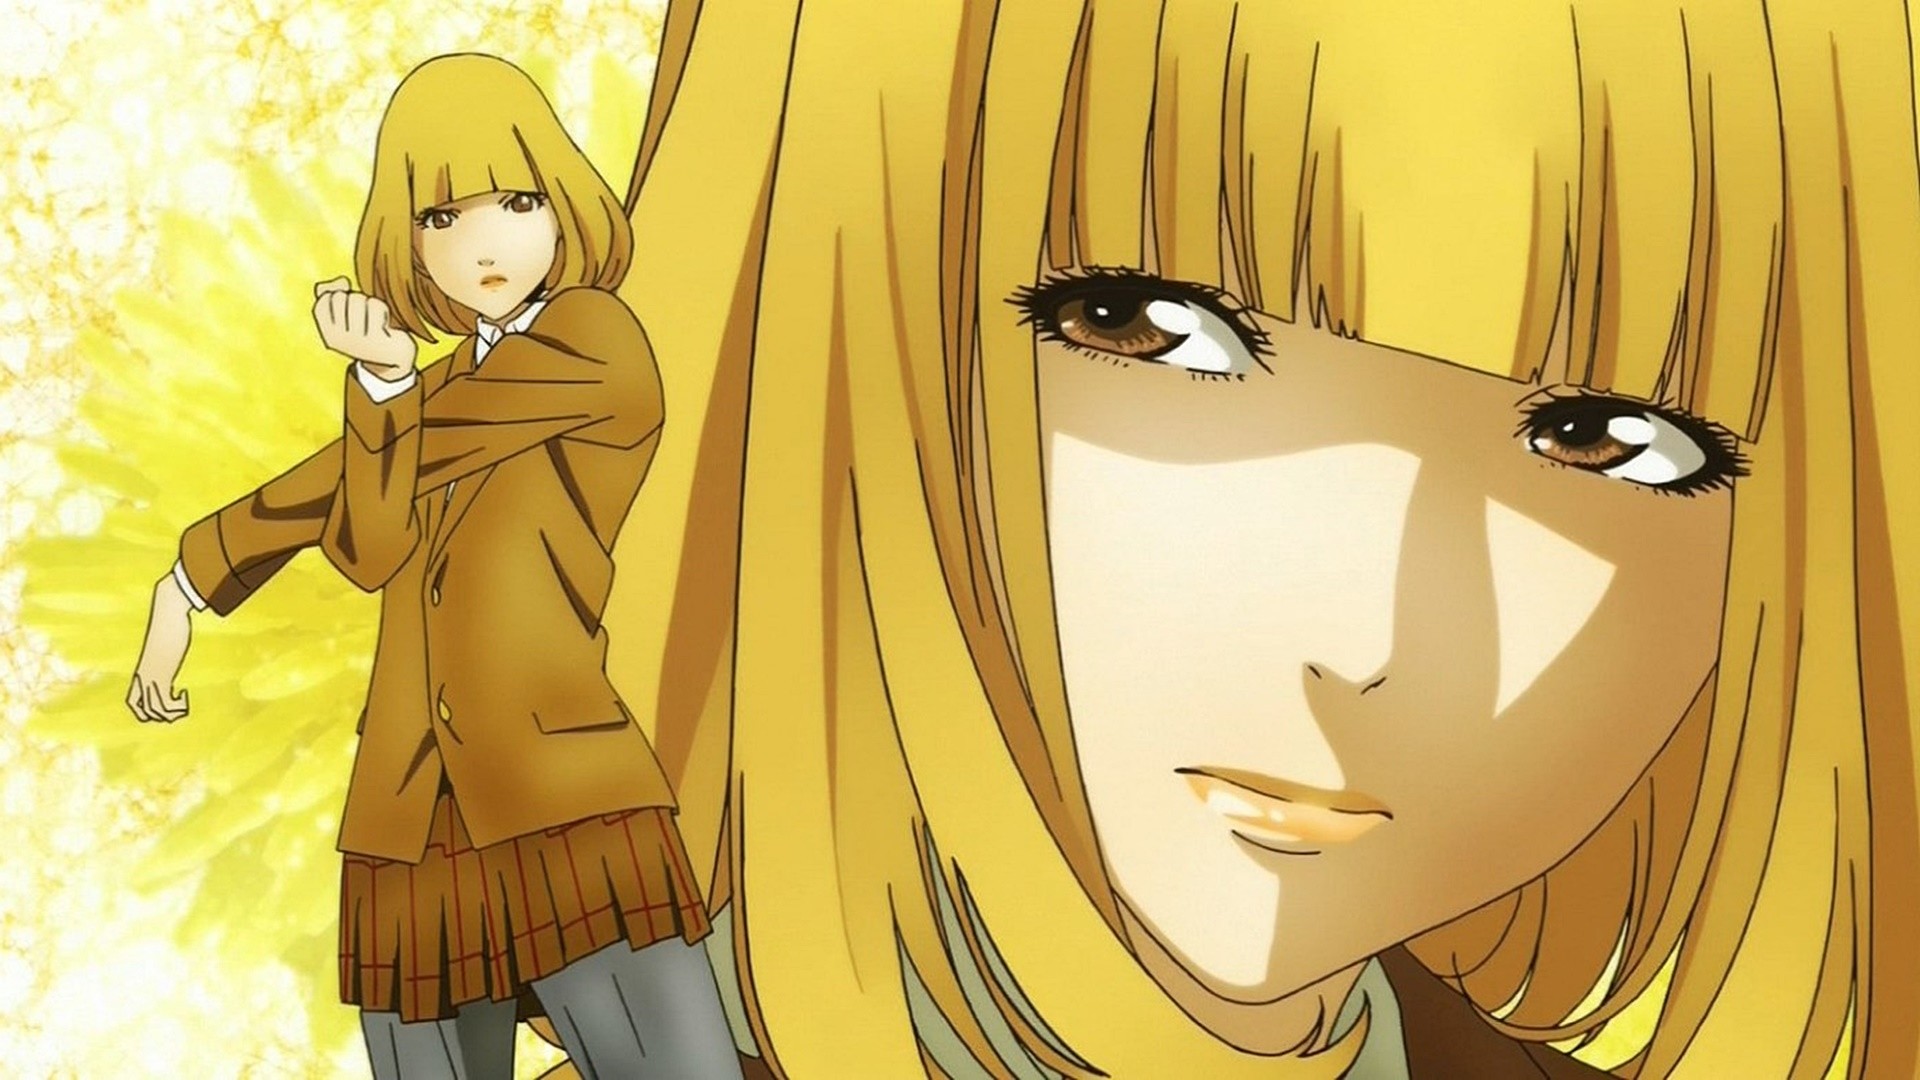 Prison School Source Keys anime, prison school, television, wallpaper, wallpapers. Submitted Anonymously 2 years ago